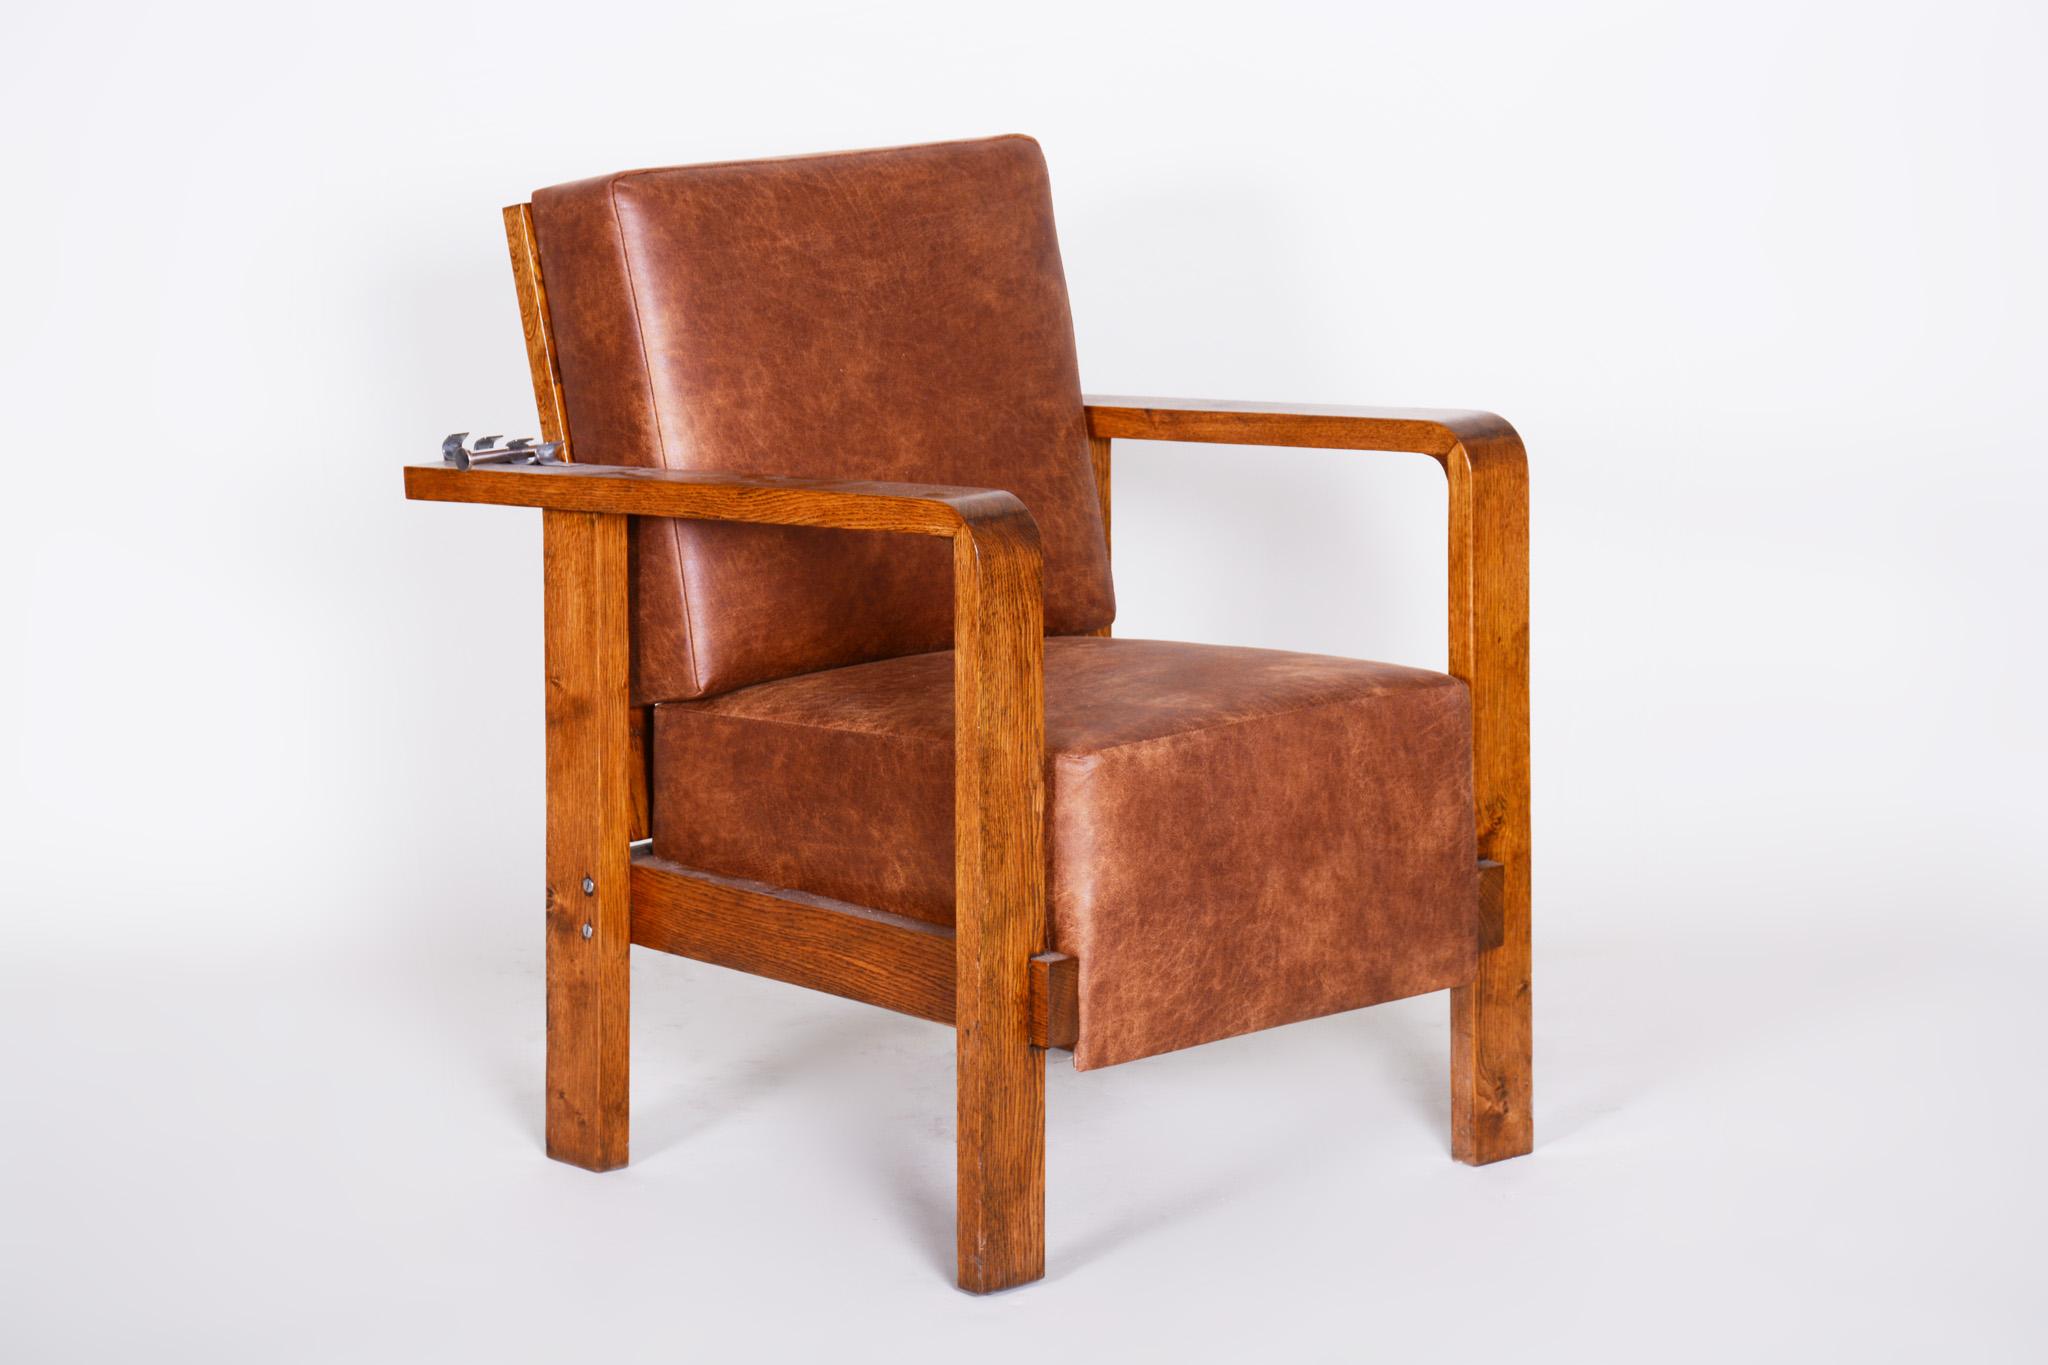 Pair of Czech Adjustable Functionalist Leather and Oak Armchairs, 1930s For Sale 4